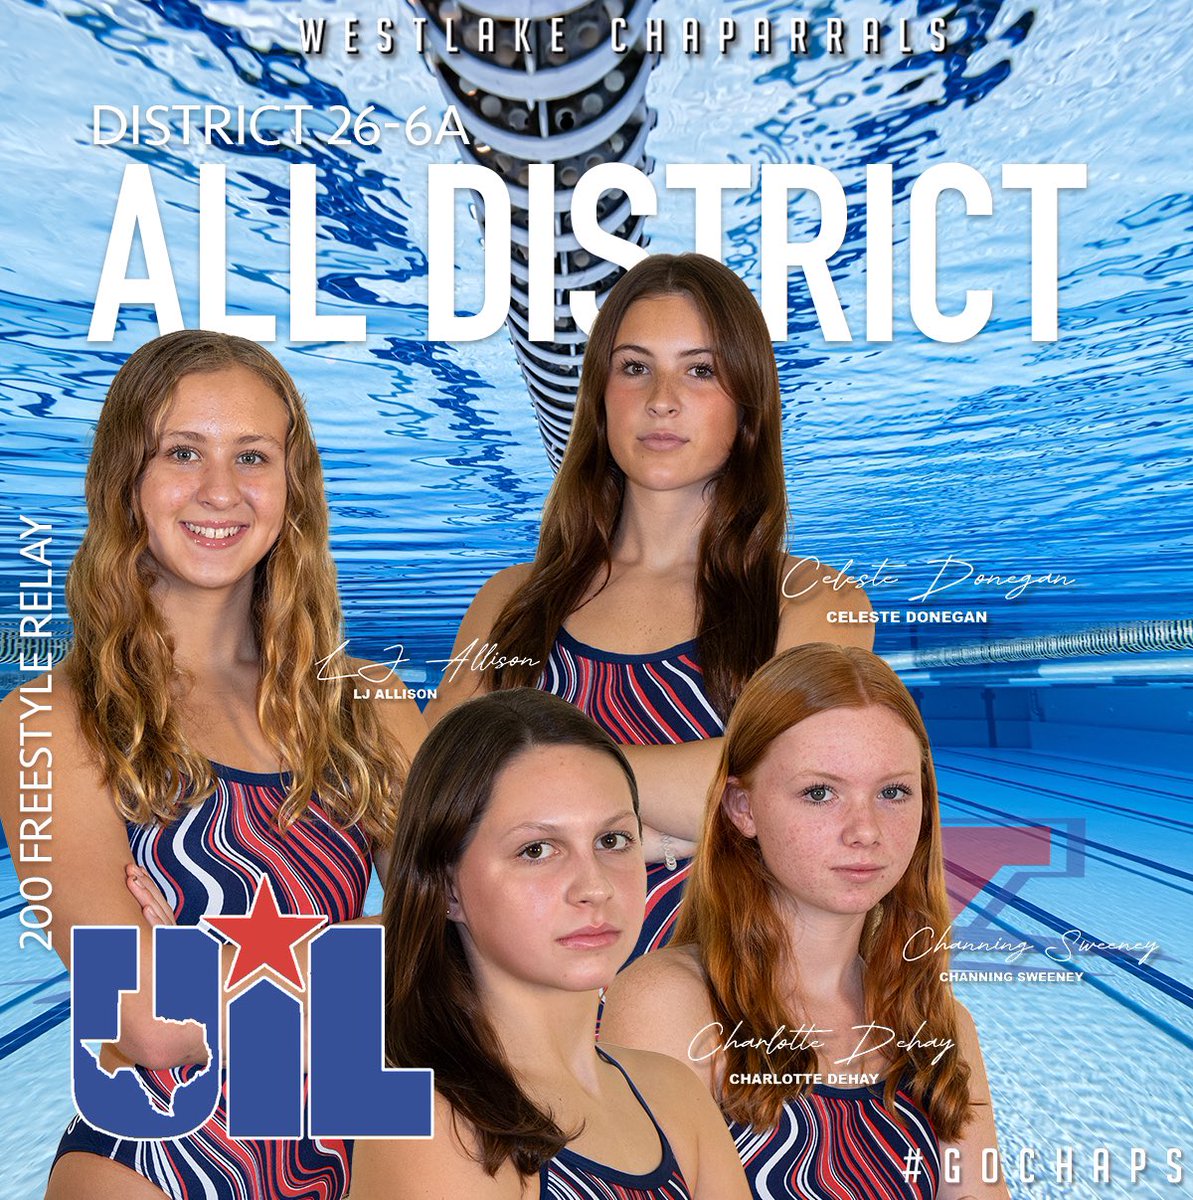 We continue our All-District coverage for Women’s Swimming and Diving by congratulating the 200 Freestyle Relay Team. These four Chaps earned a spot on the 26-6A All-District 1st Team. #GoChaps 200 Freestyle Relay LJ Allison Charlotte Dehay Channing Sweeney Celeste Donegan